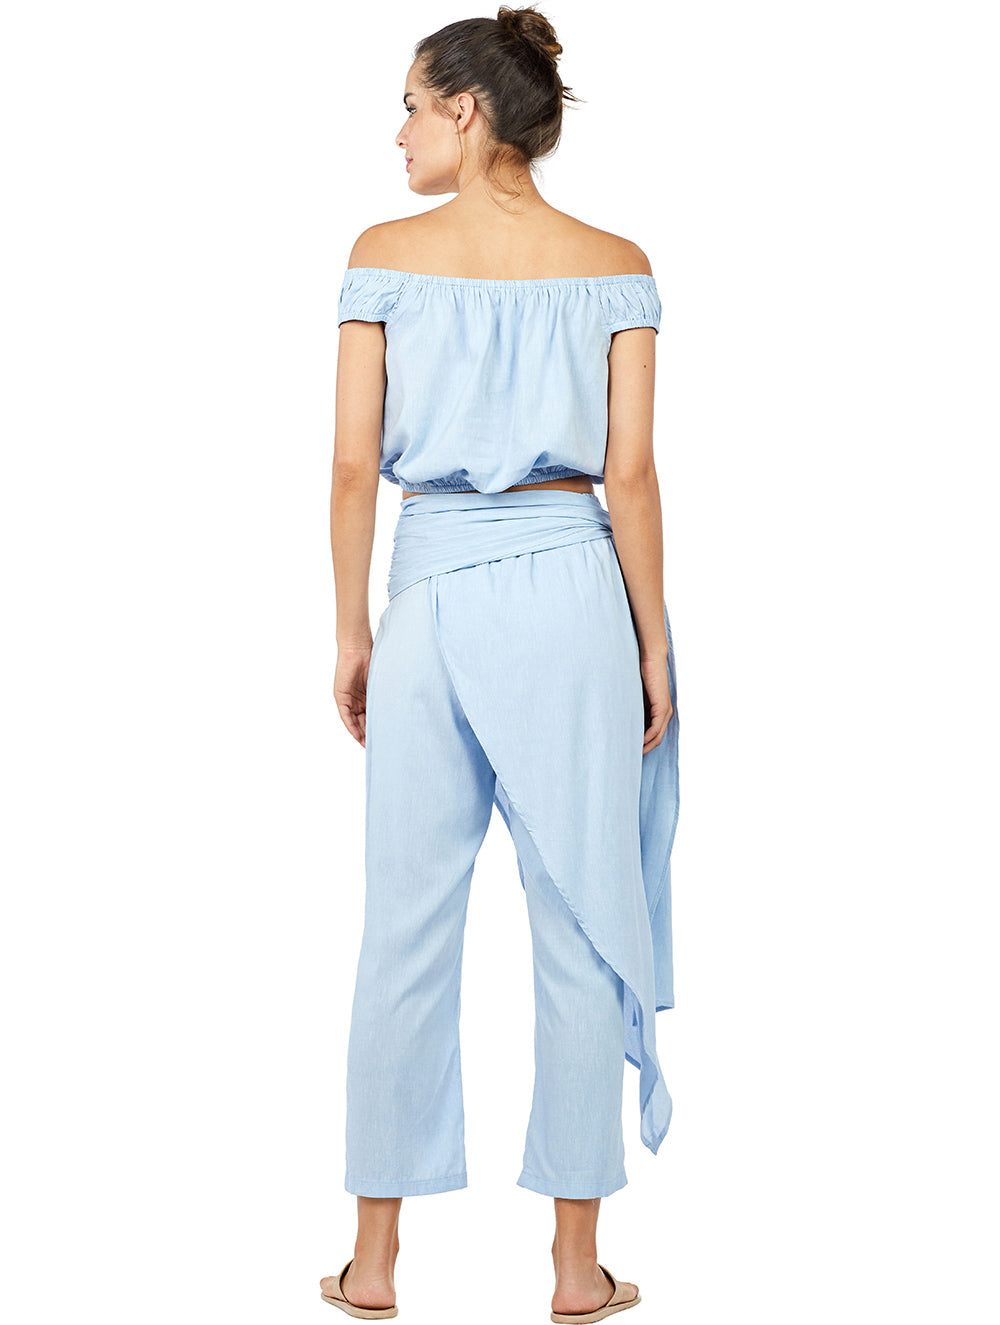 Solid-color Linen Pants with Overskirt